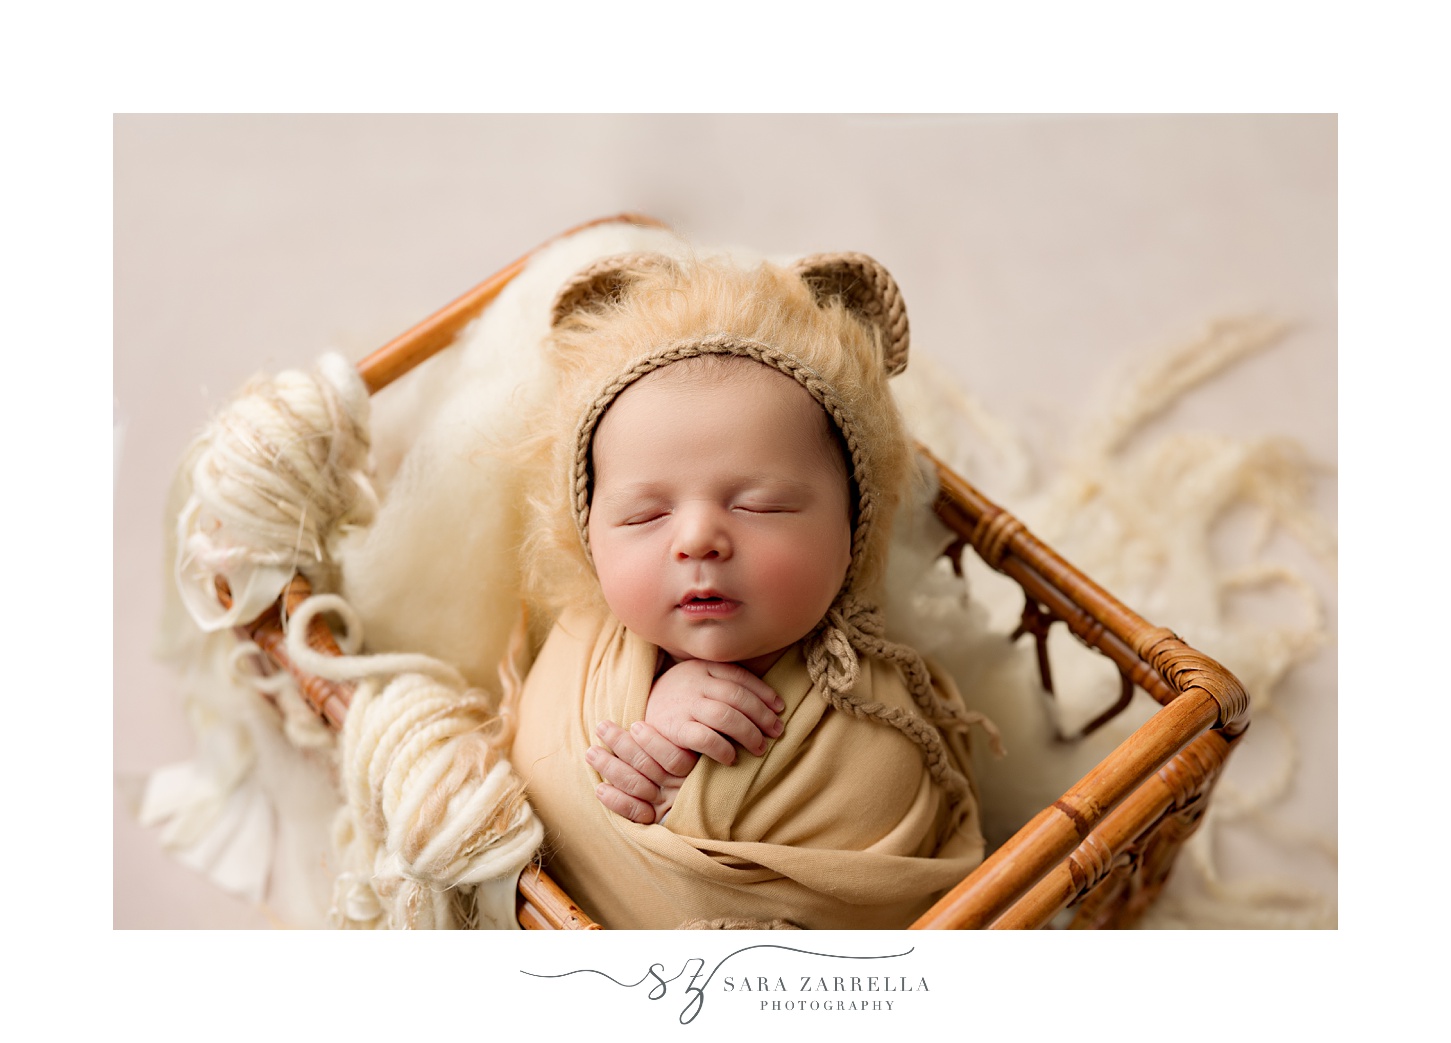 baby in neutral outfit lays in wooden crib during newborn session with Rhode Island newborn and family photographer Sara Zarrella Photography